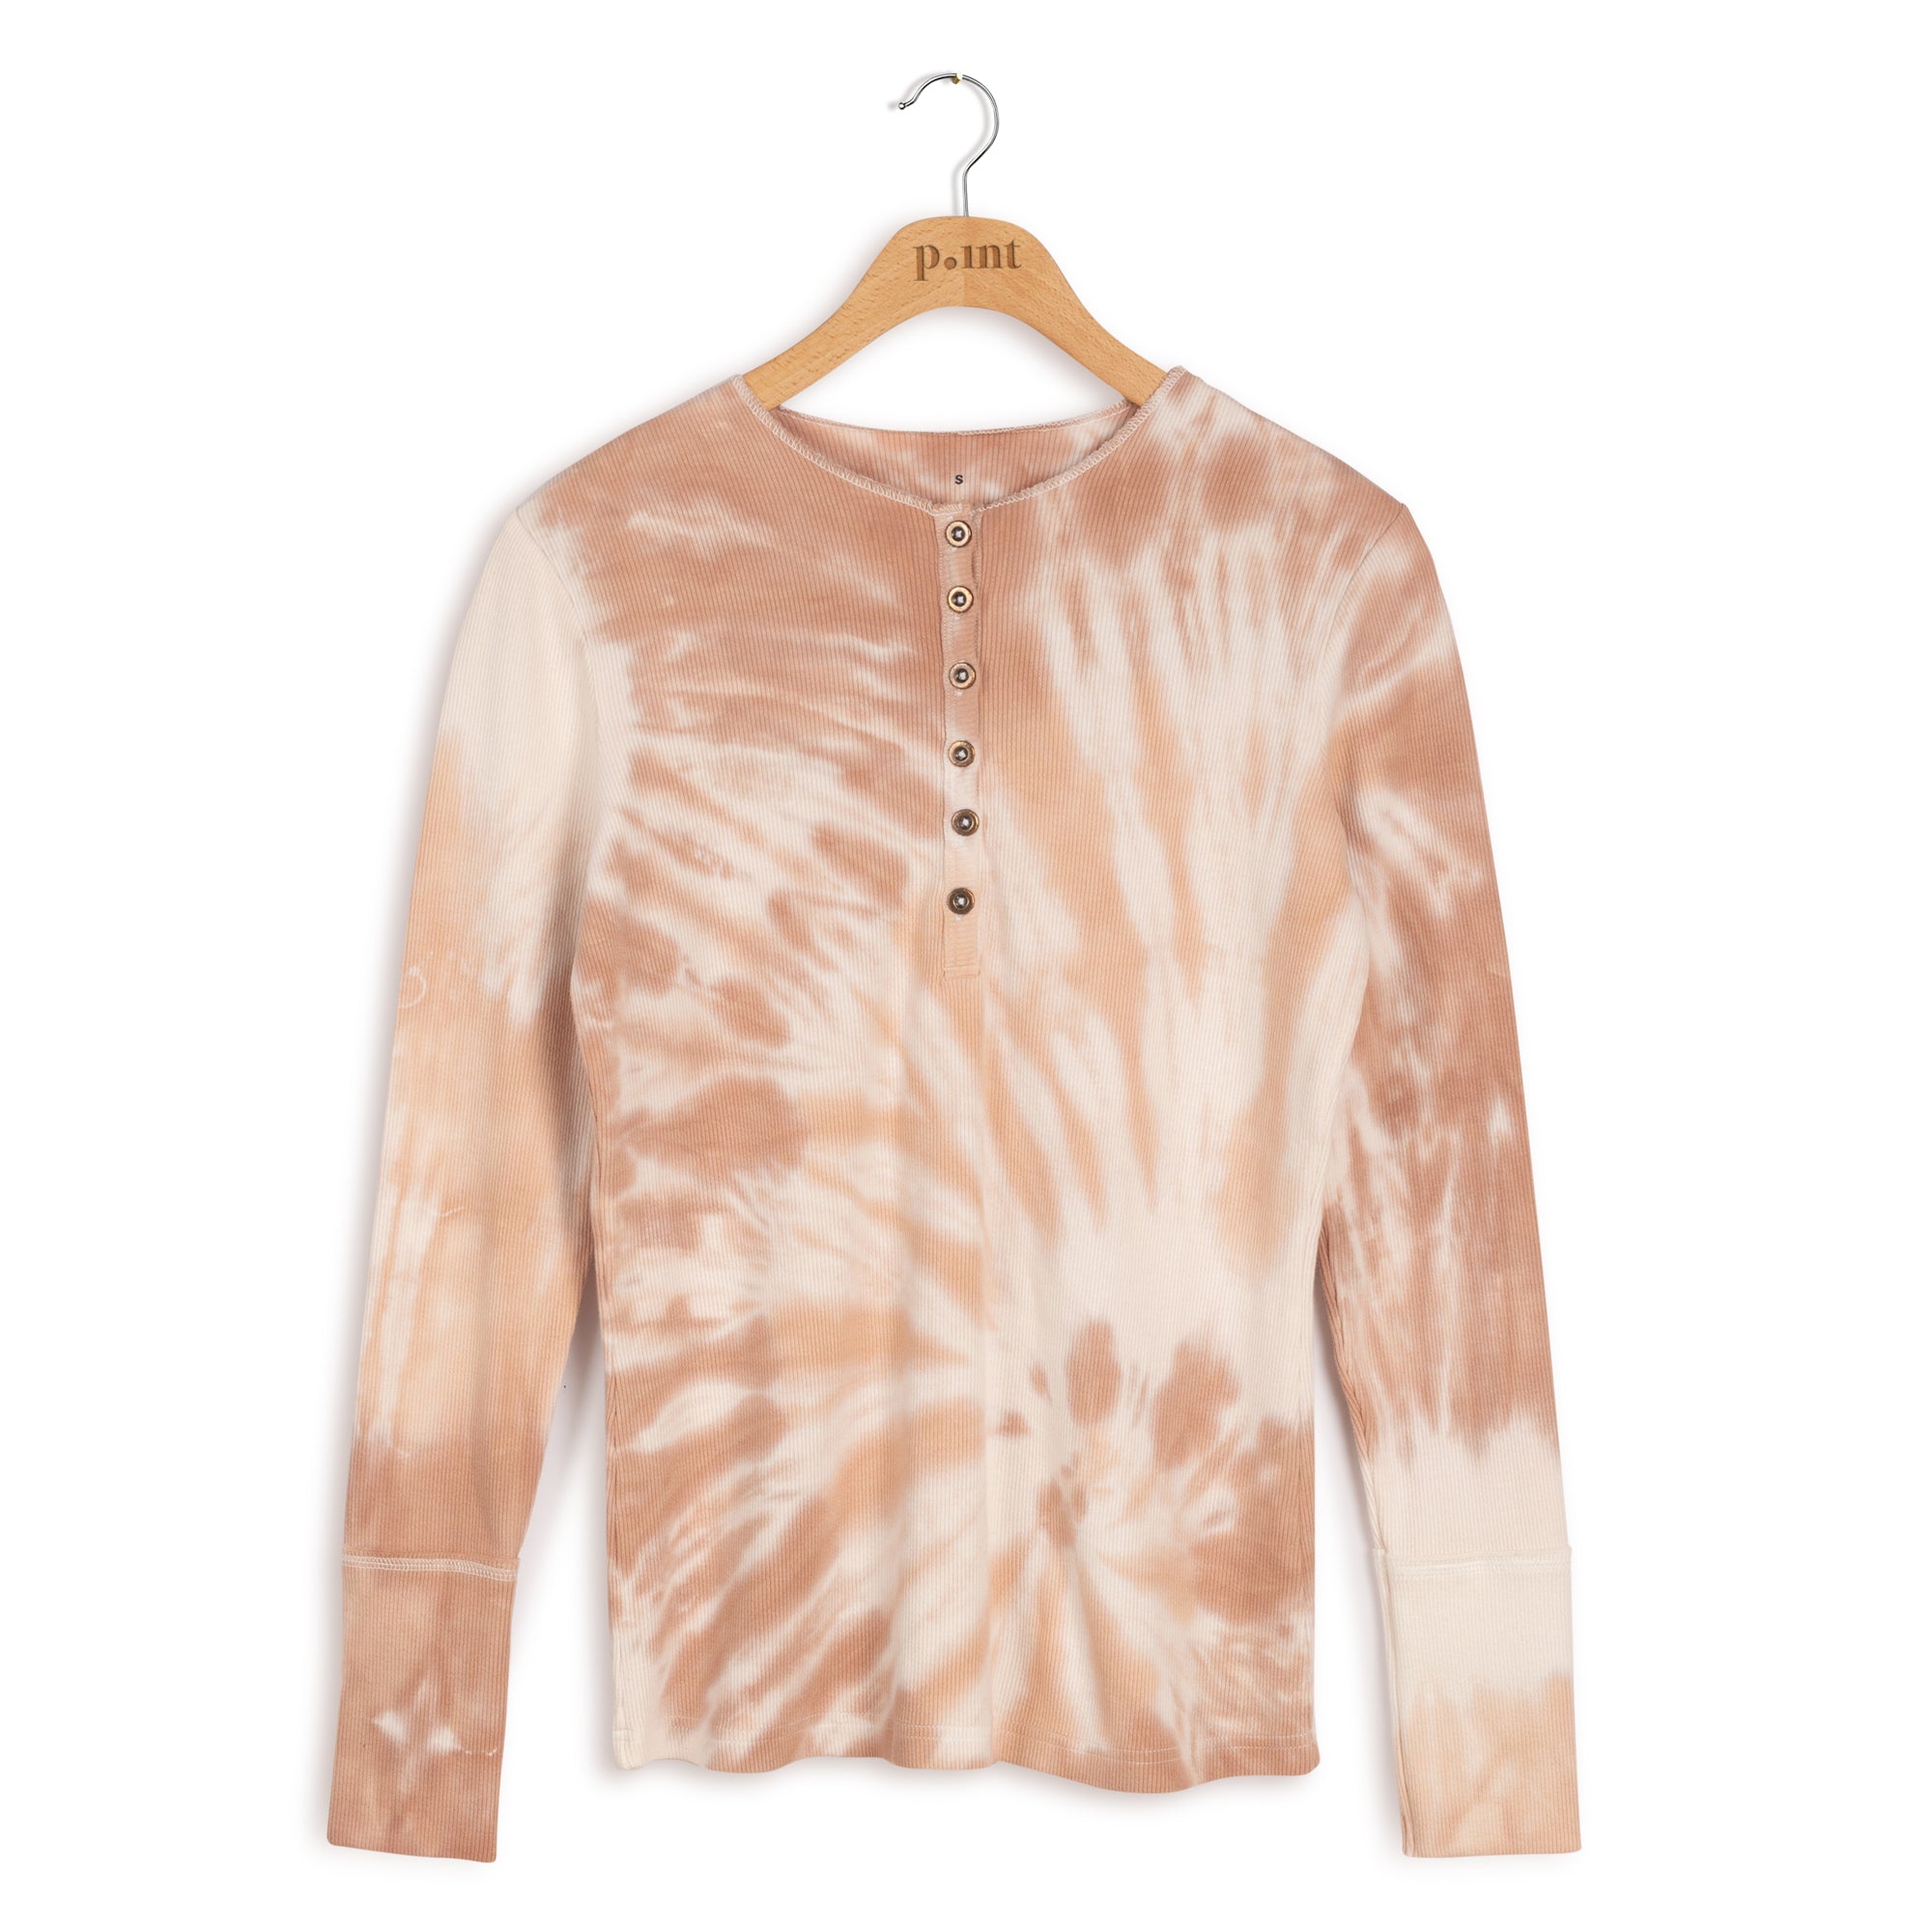 Point Ribbed Tie-Dye Henley Top Blush Ribbed Cotton Blend